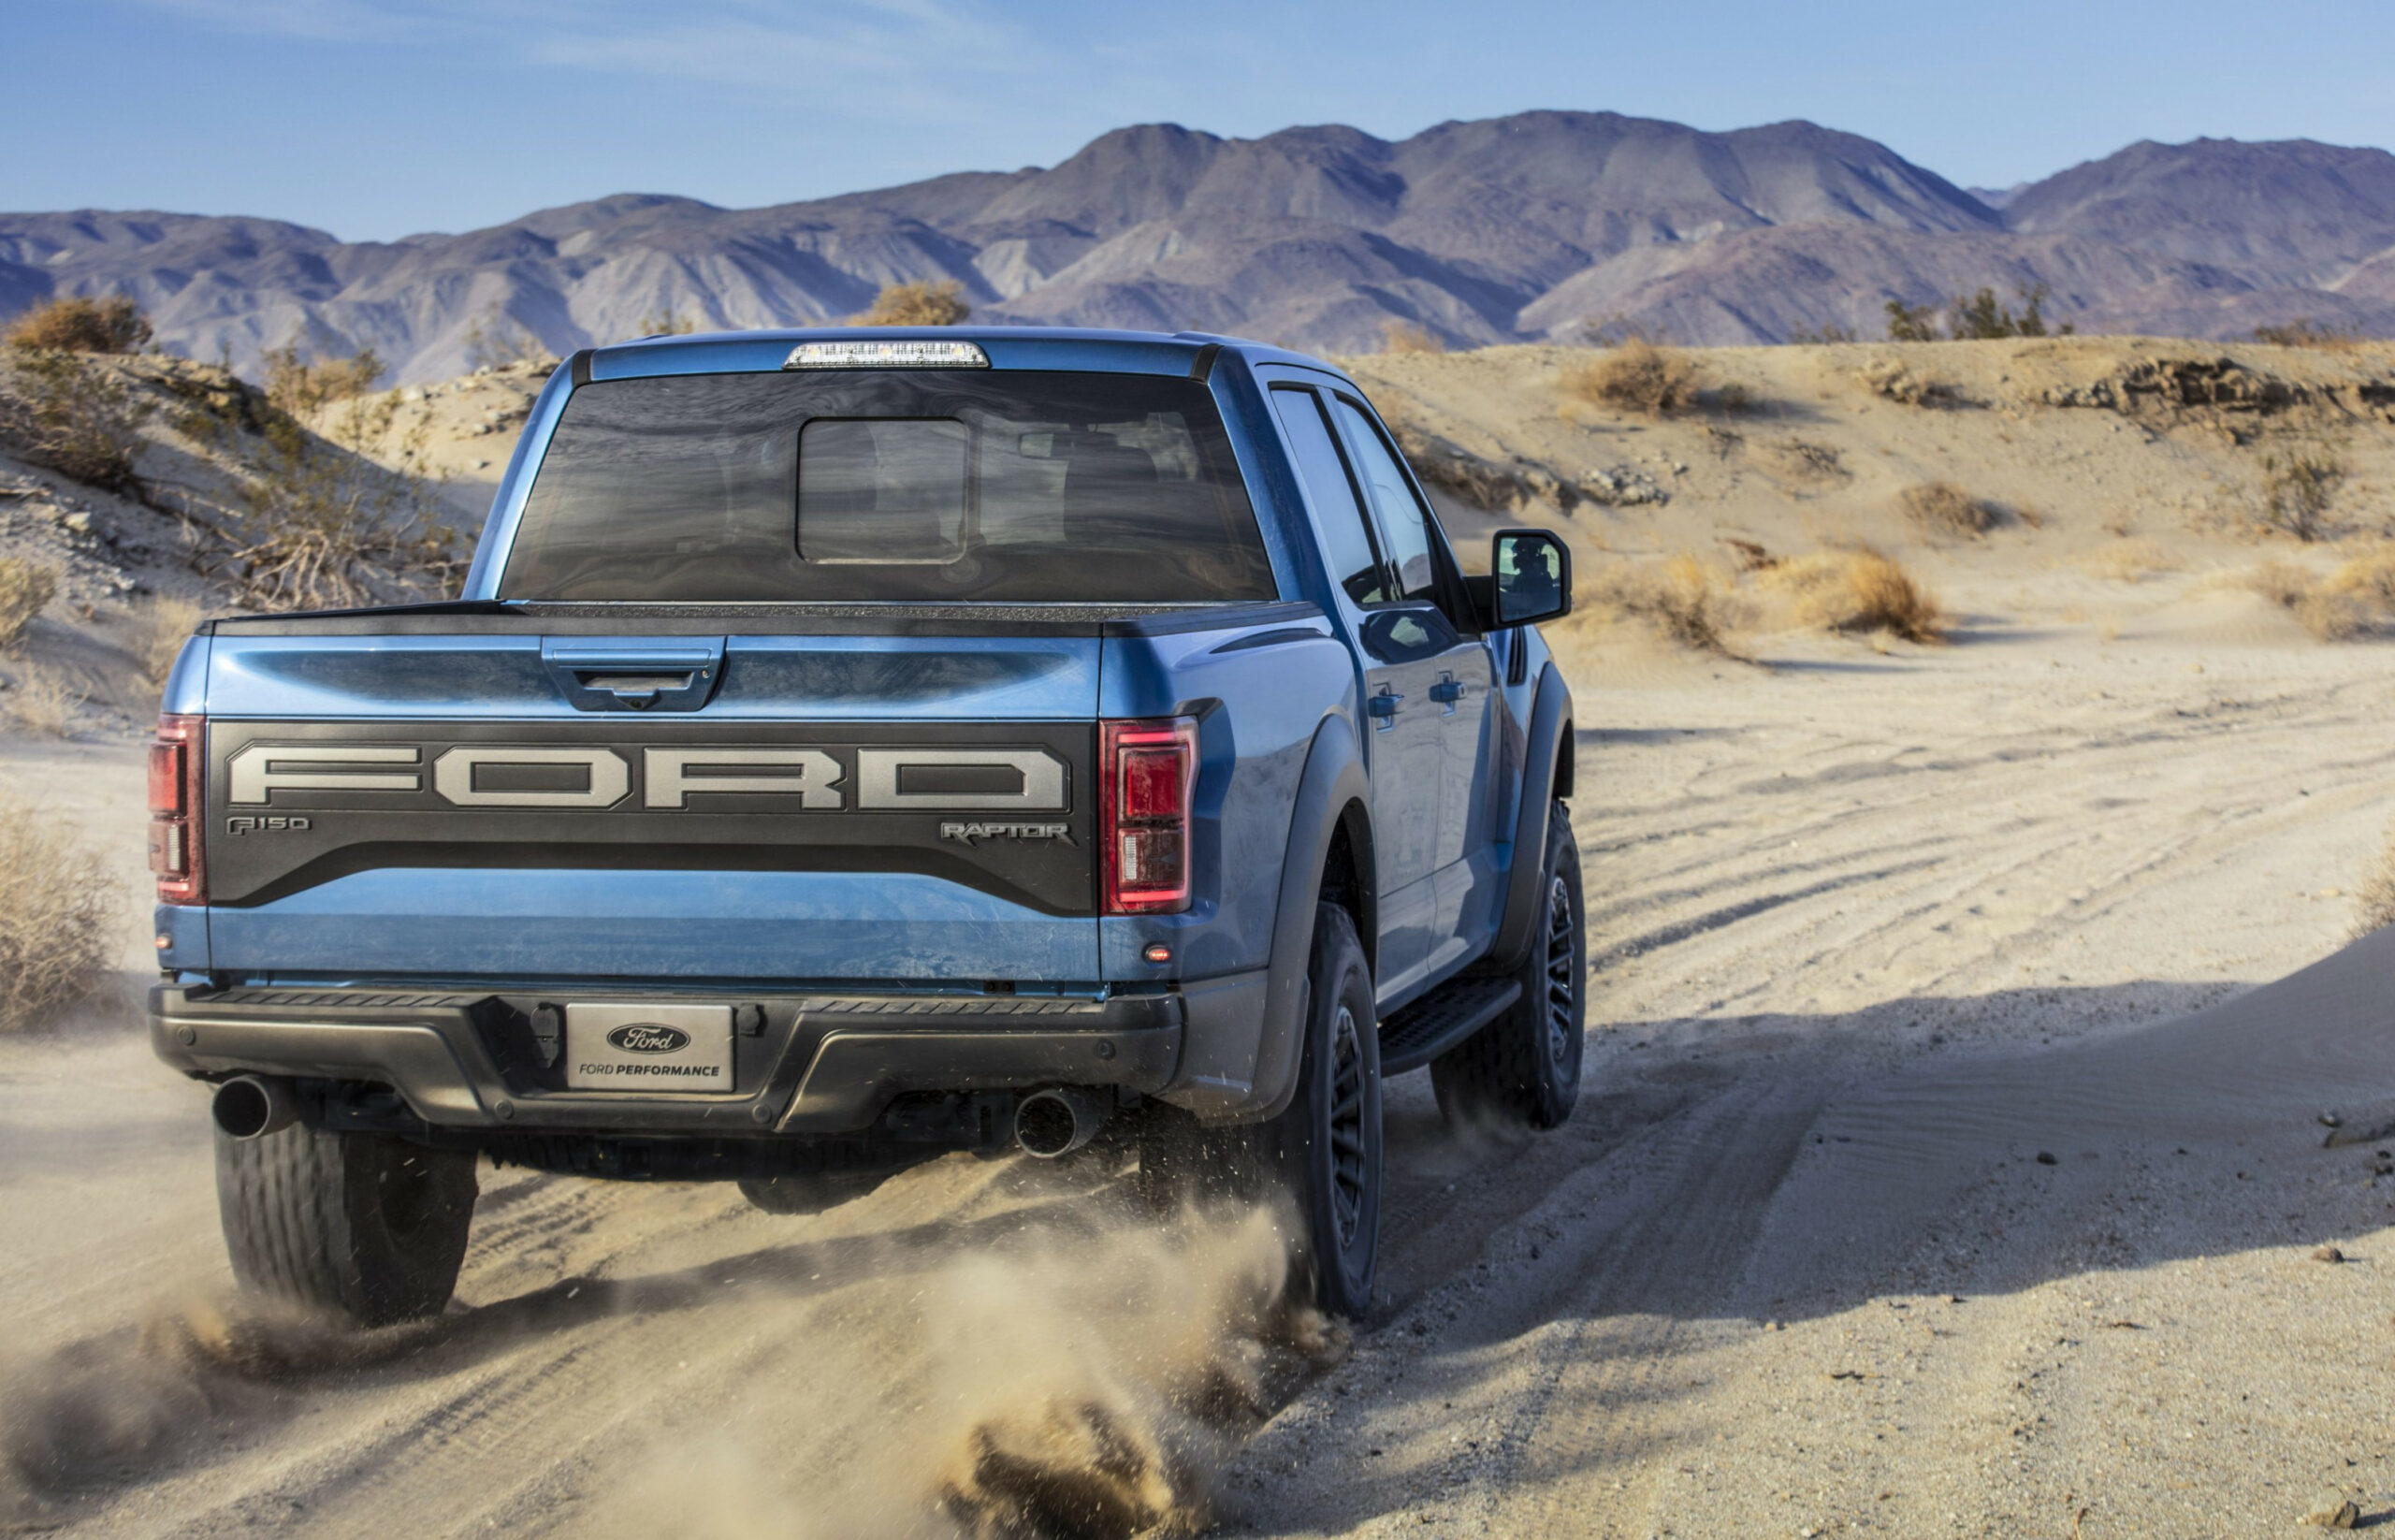 Performance and New Engine 2022 Ford F150 Svt Raptor